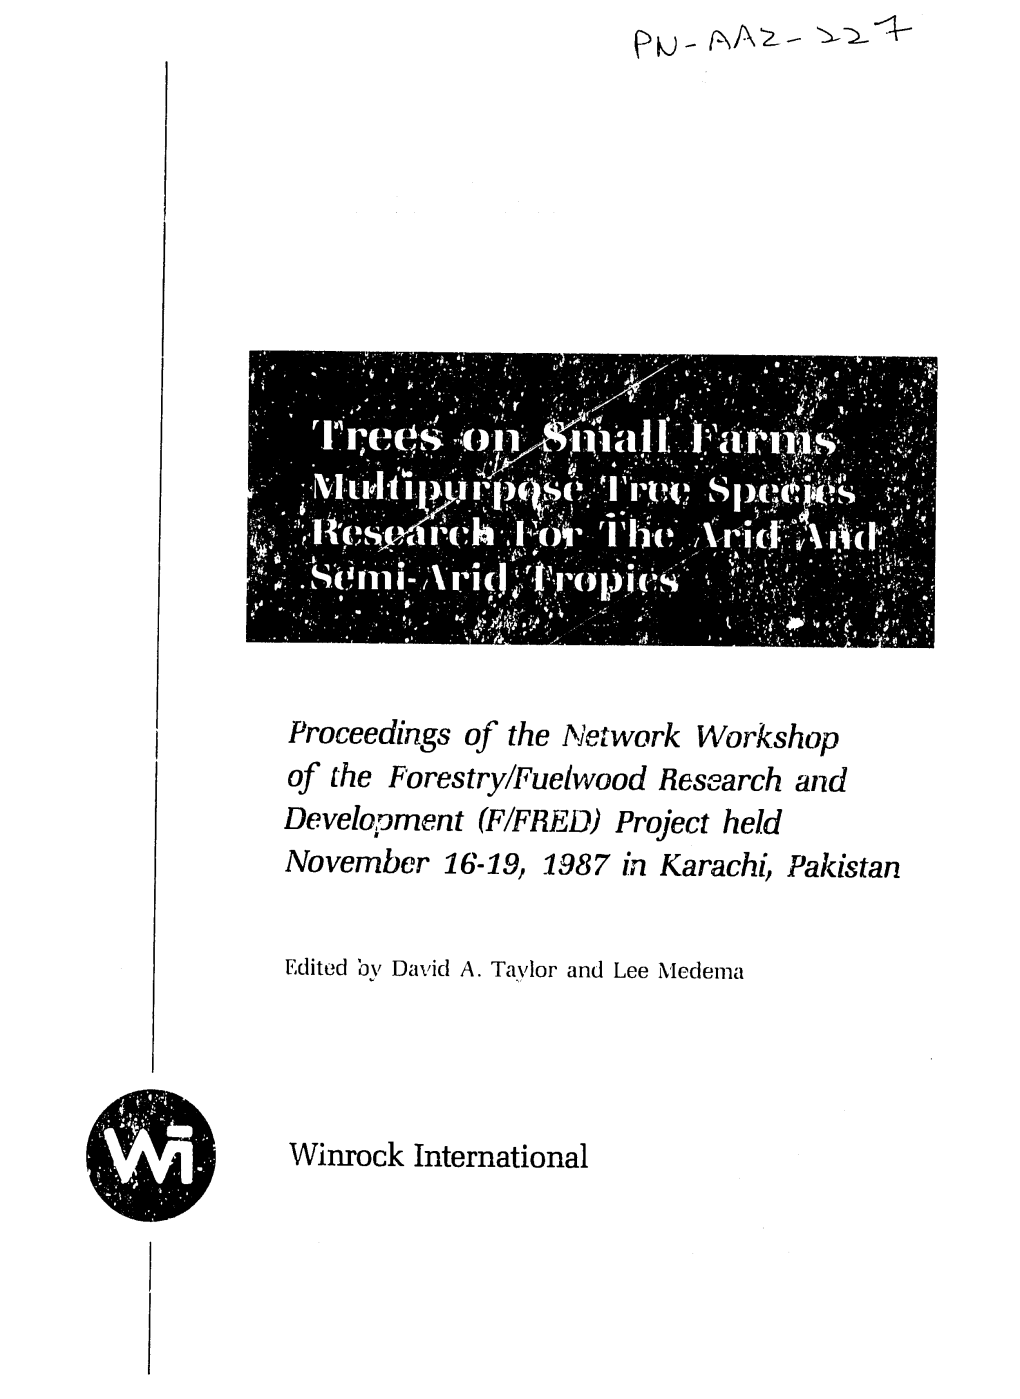 Of the Forestry/Fuelwoodresearch and Development (F/FRED)Project Held November 16-19, 1987 in Karachi,Pakistan Winrock Internati